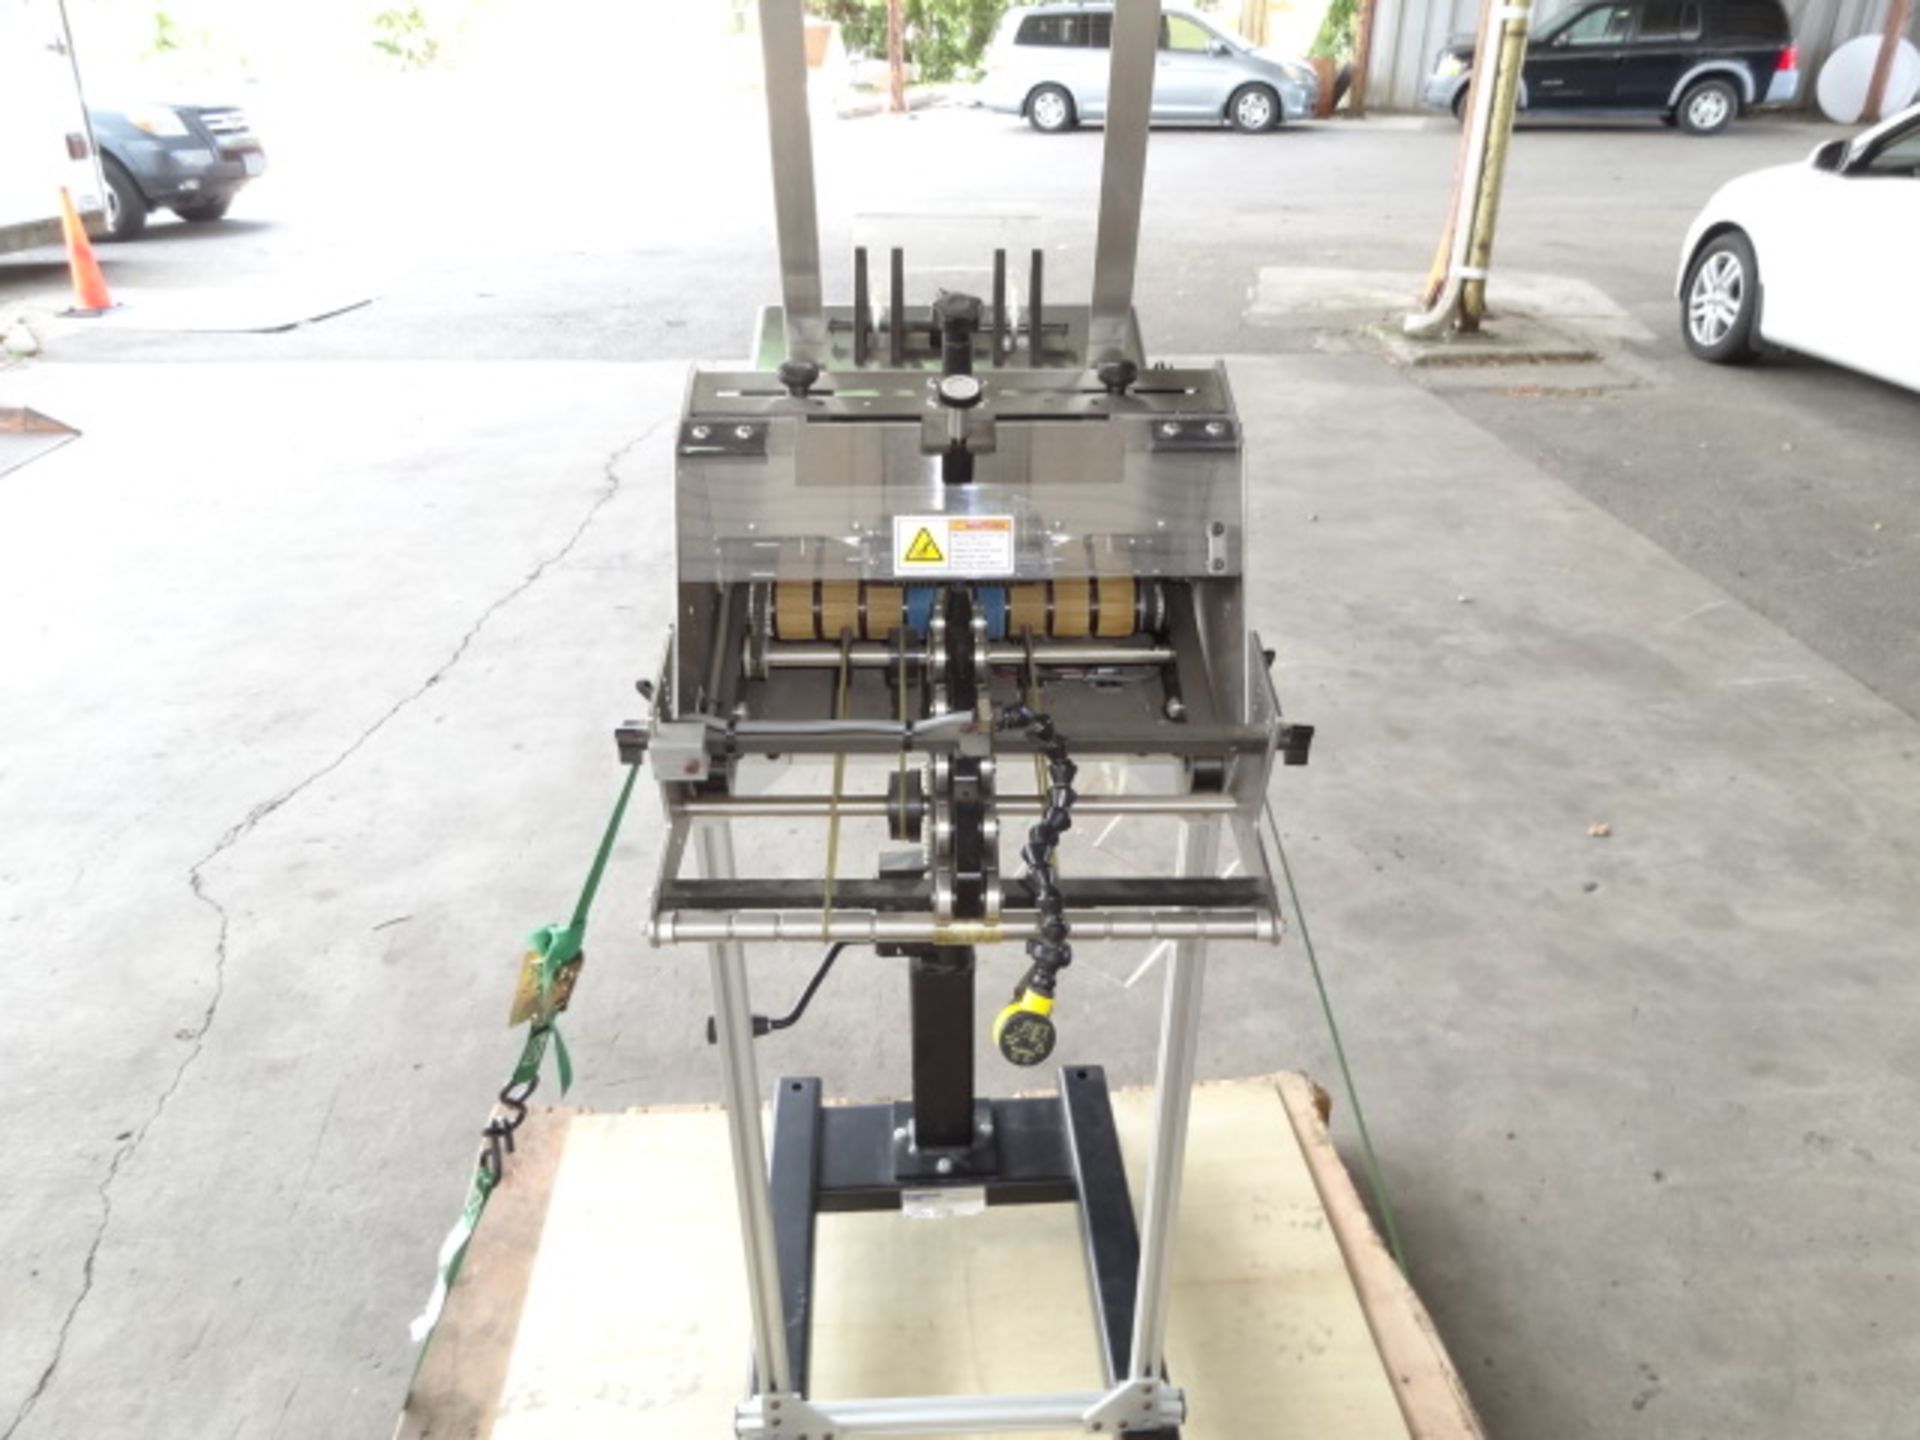 Streamfeeder Friction Feeder, Model # ST-1250 PRO, S/N 1250EXA442, for placing pamphlet , borchure - Image 2 of 4